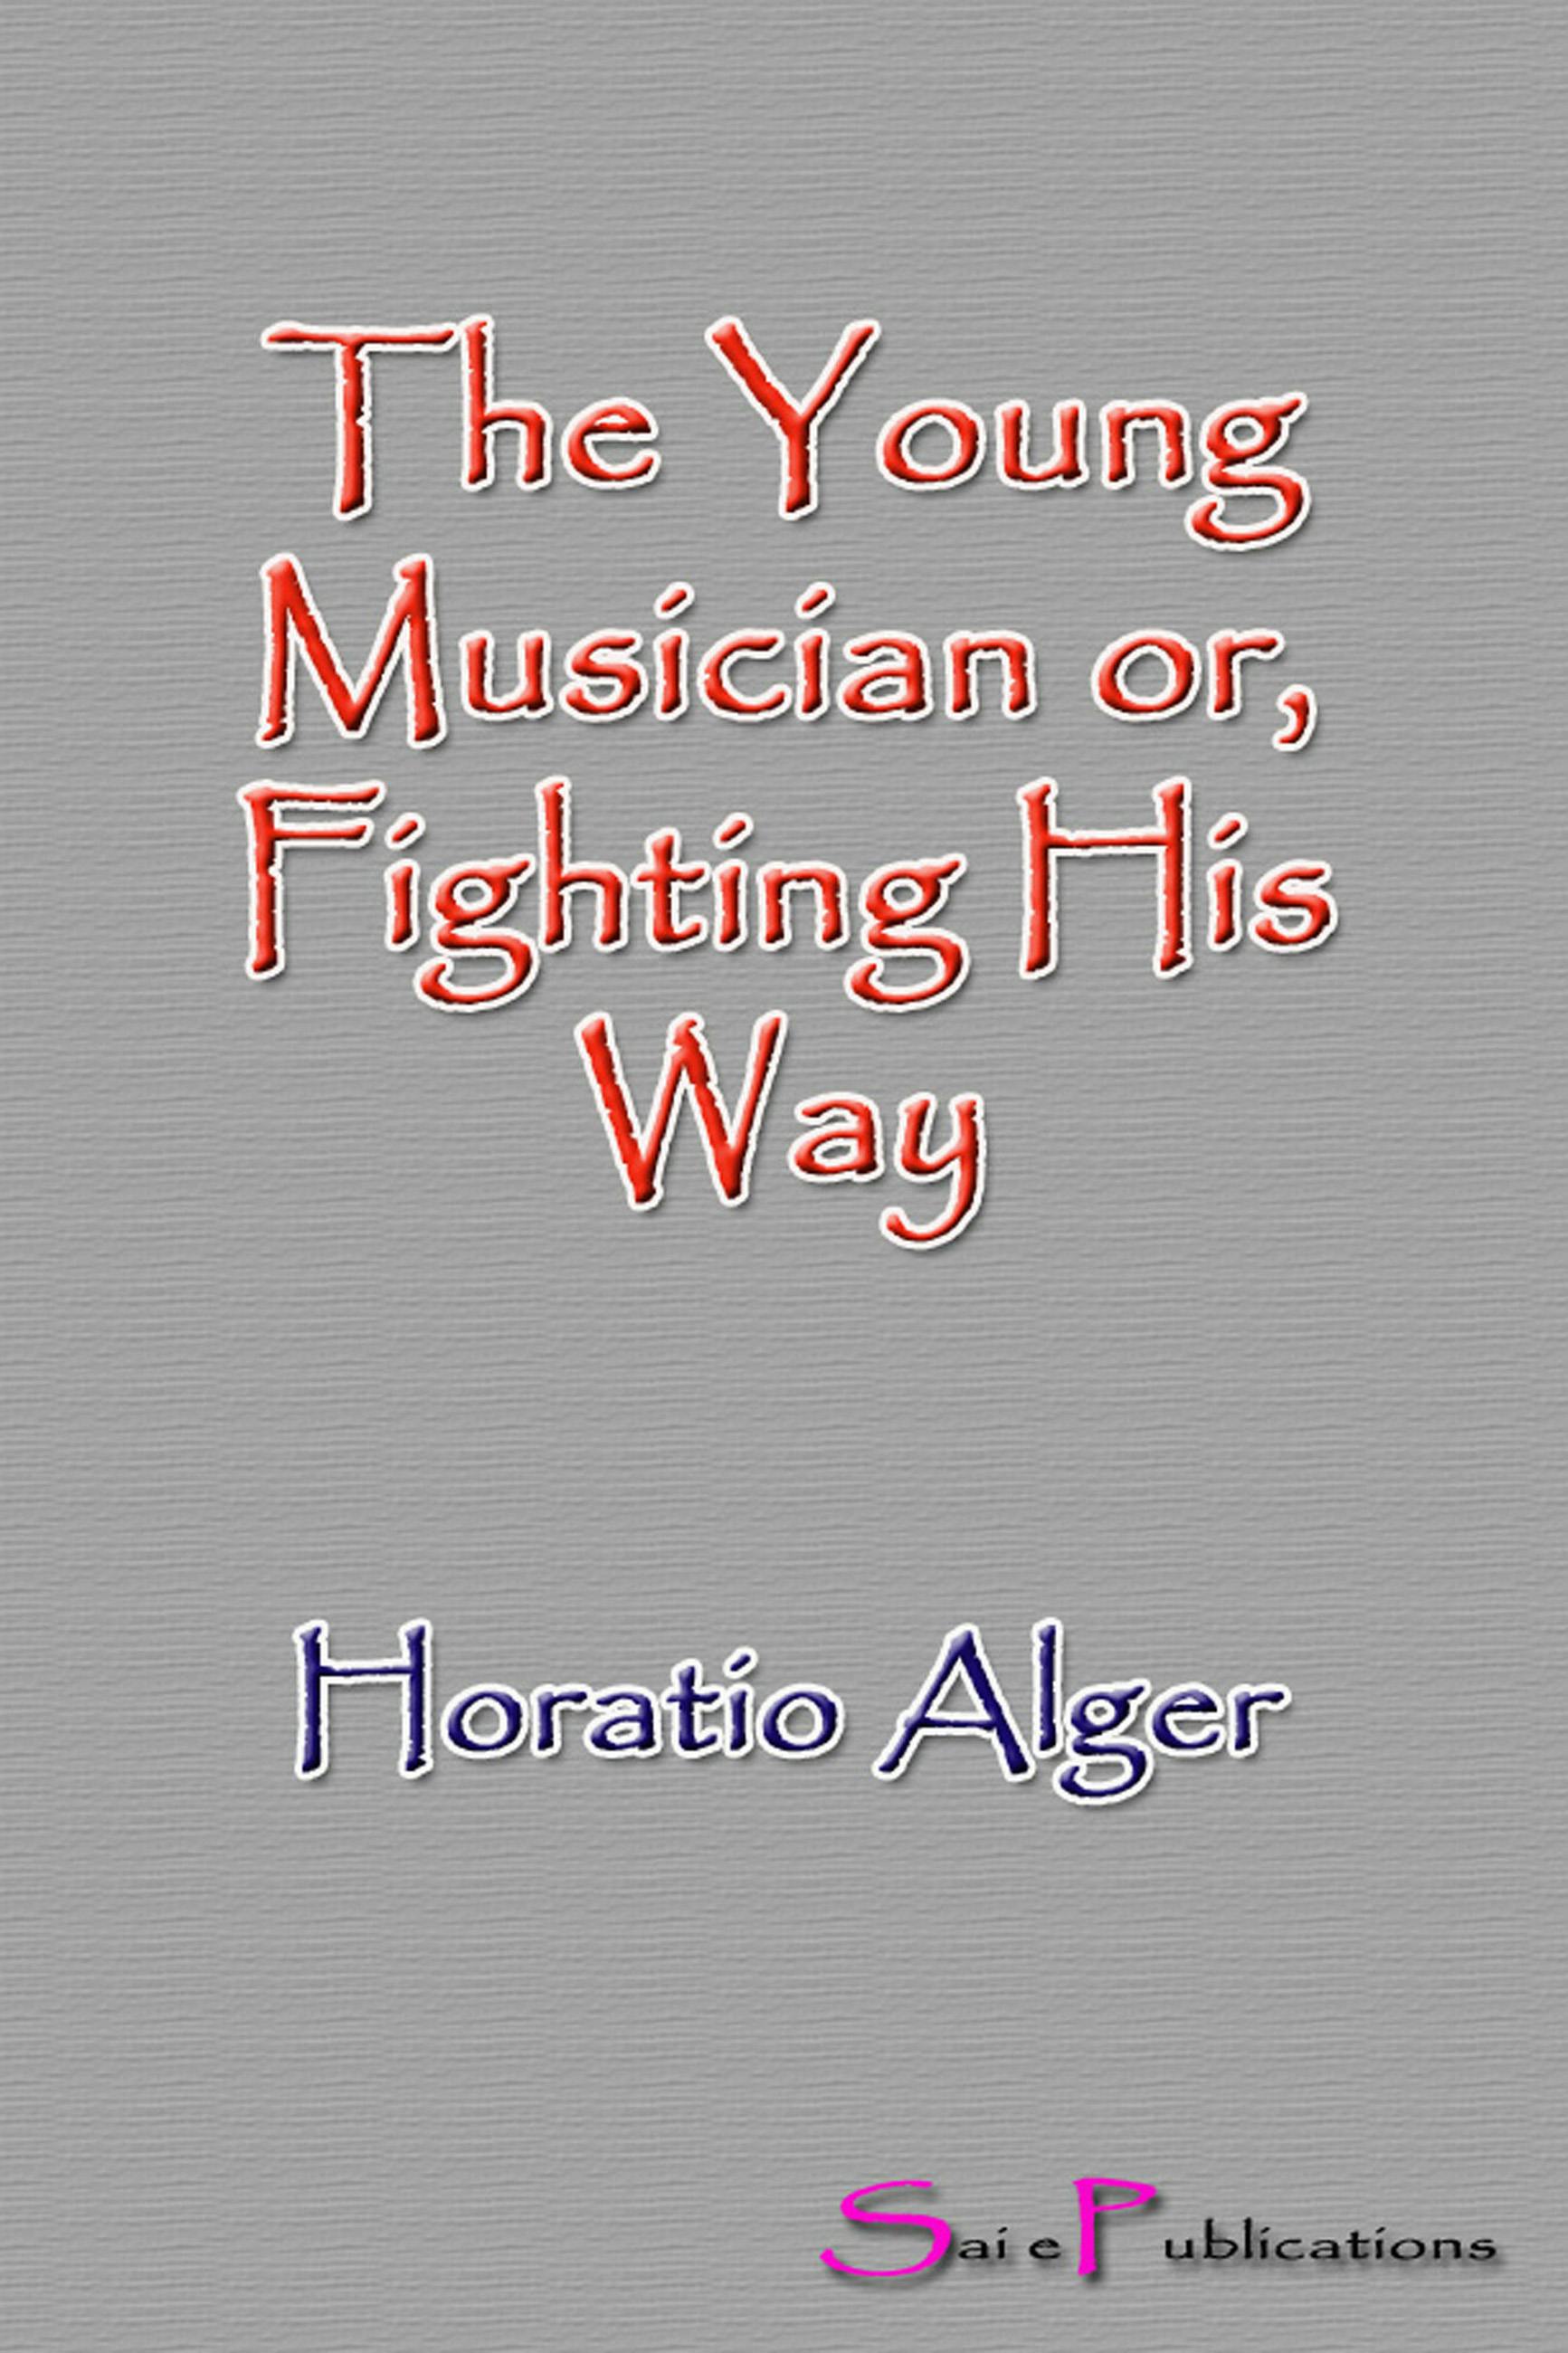 The Young Musician or, Fighting His Way - undefined